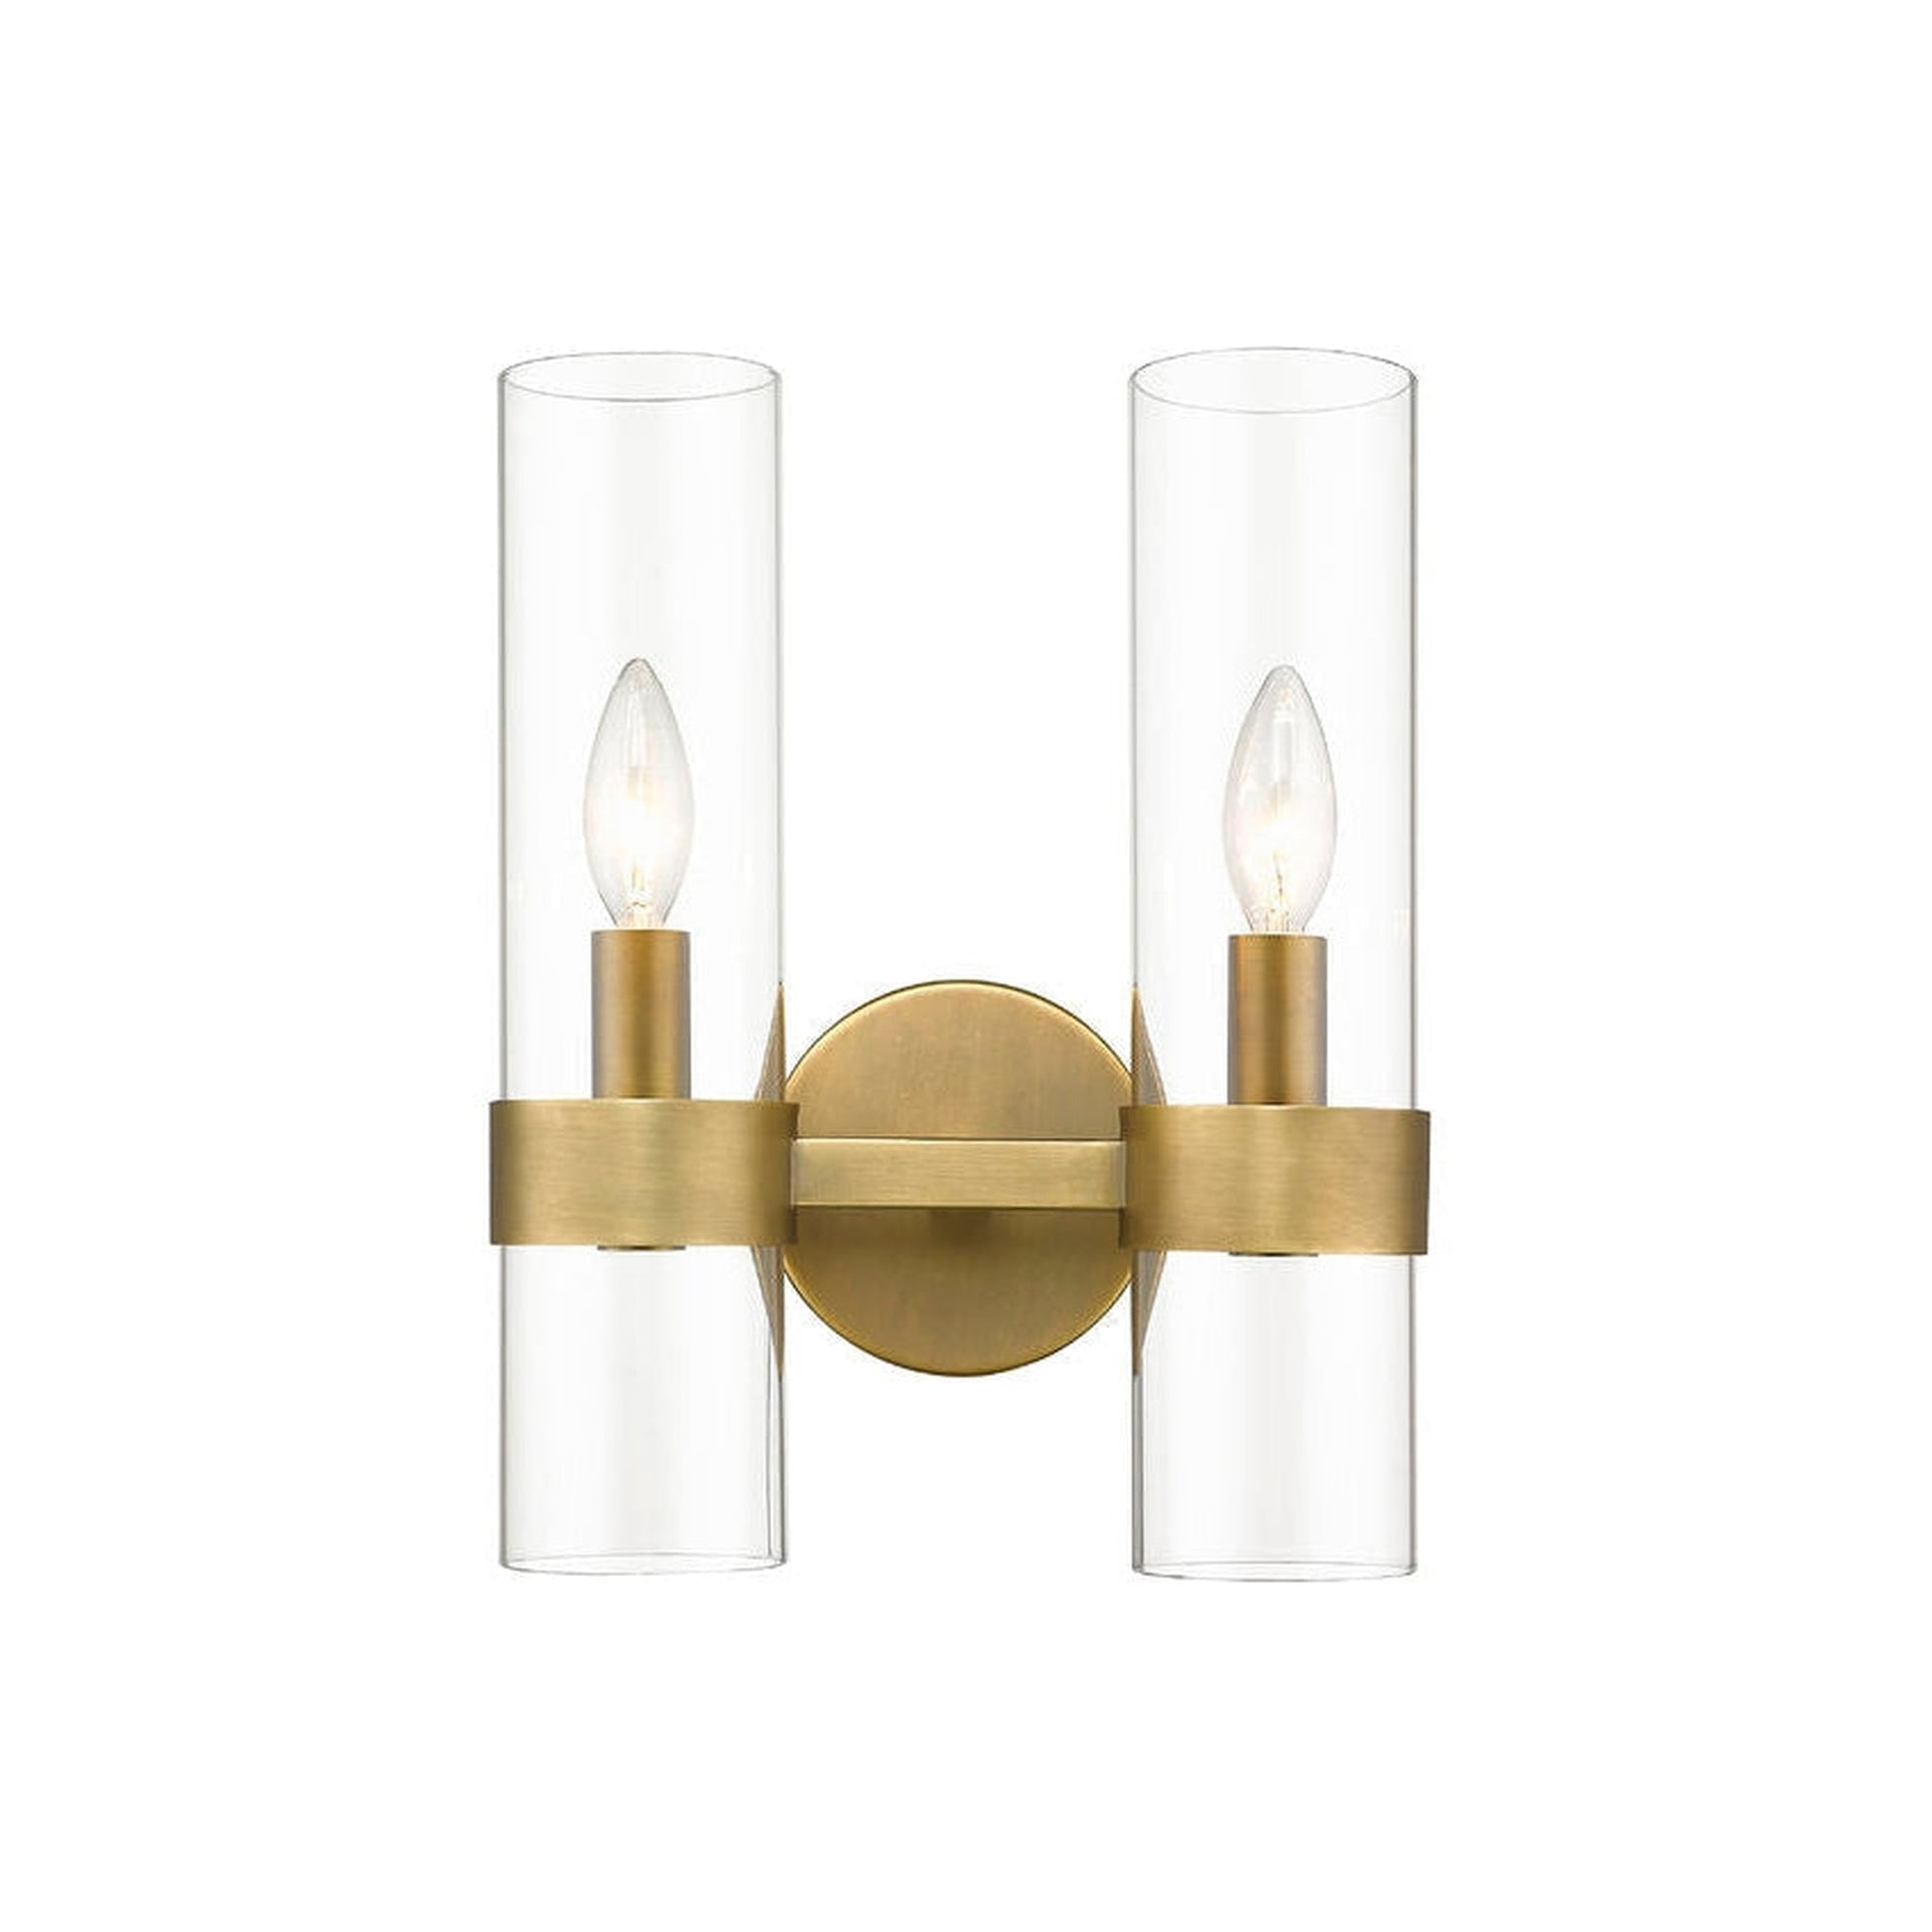 Z-Lite Datus 7" 2-Light Rubbed Brass Wall Sconce With Clear Glass Shade